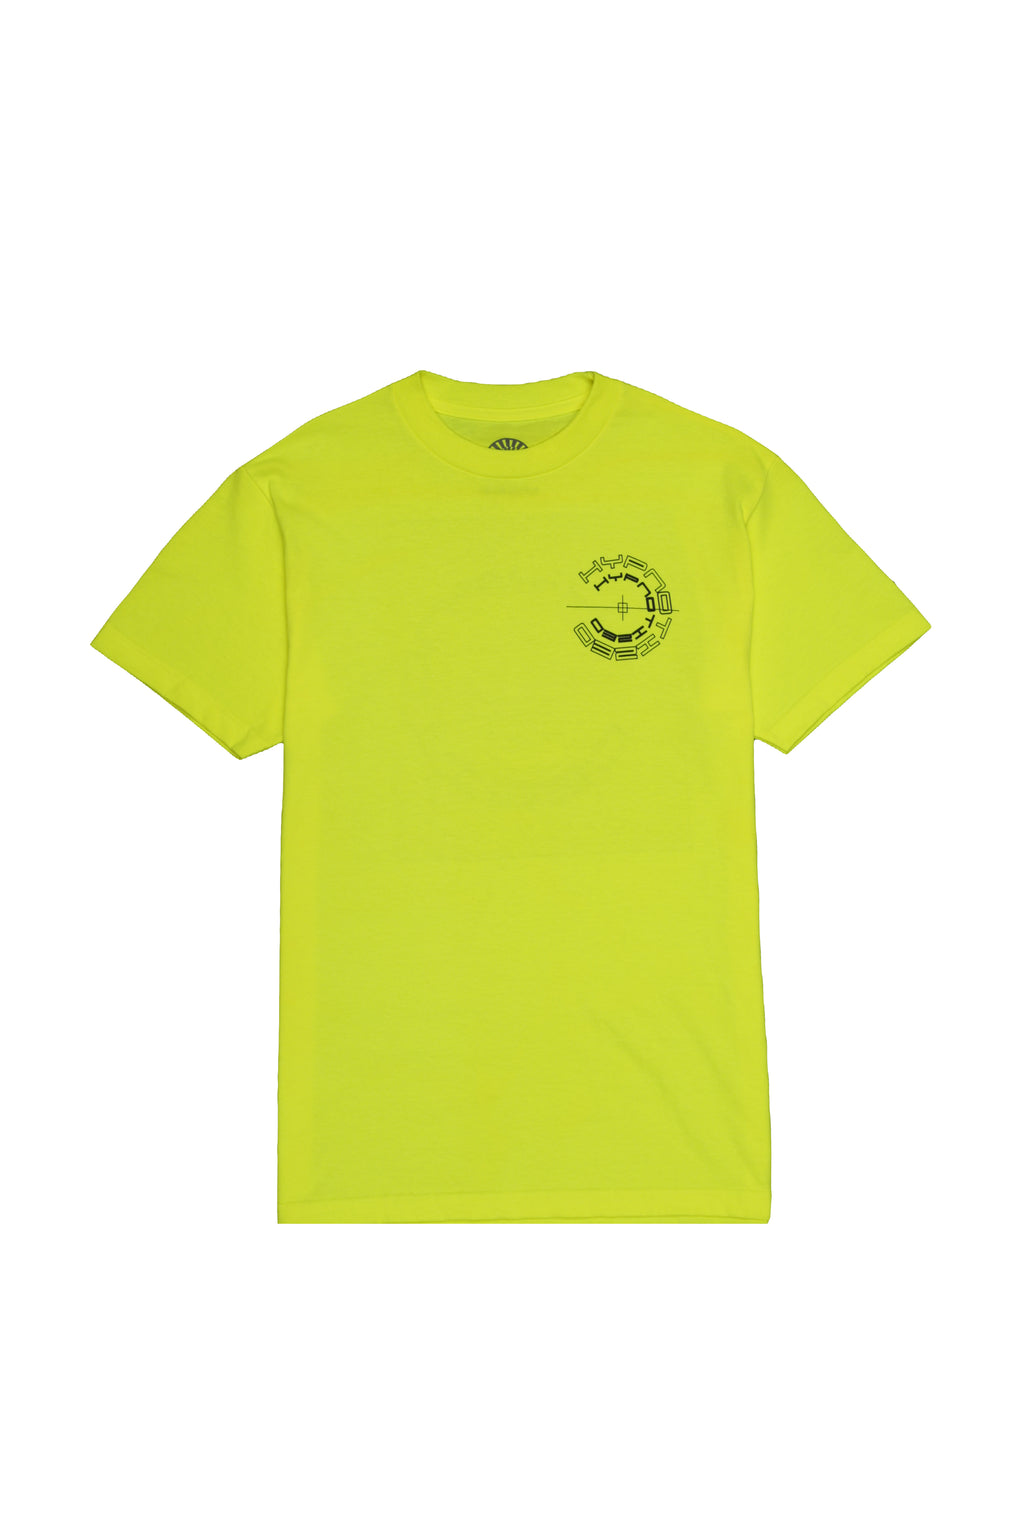 Florescent Yellow Enter The Void Tee